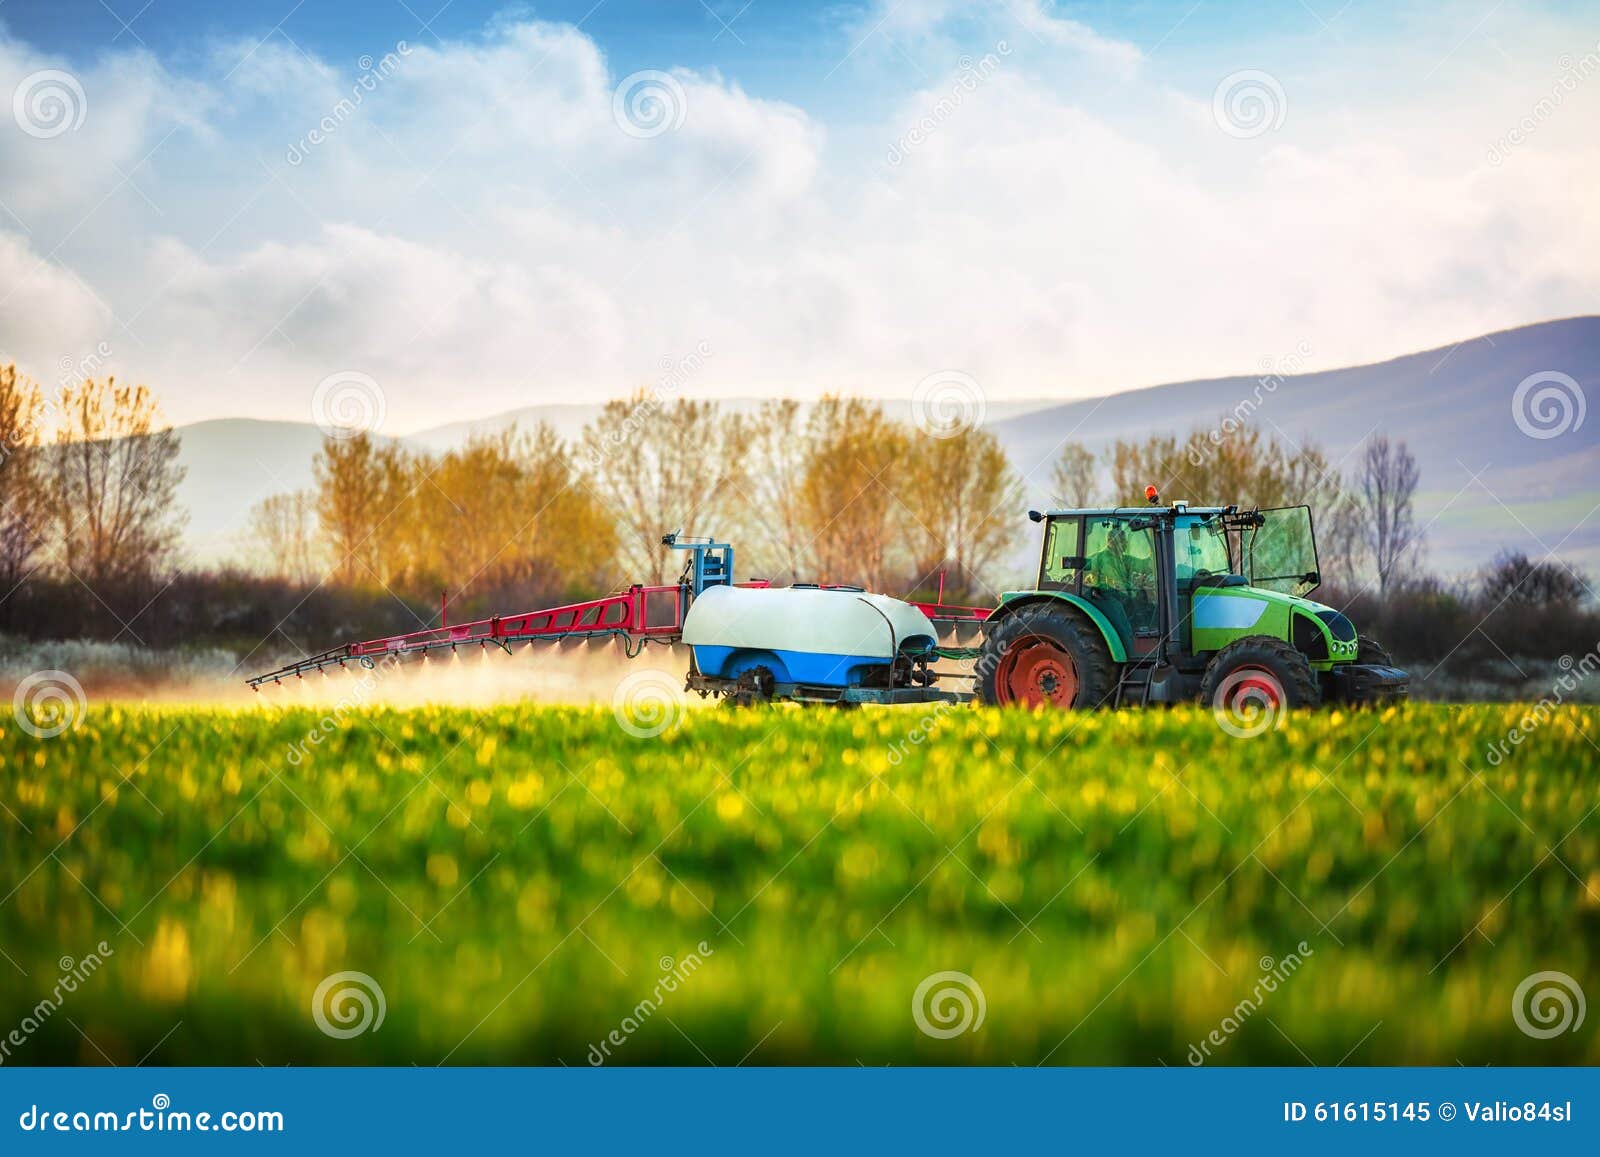 farming tractor plowing and spraying on the green field